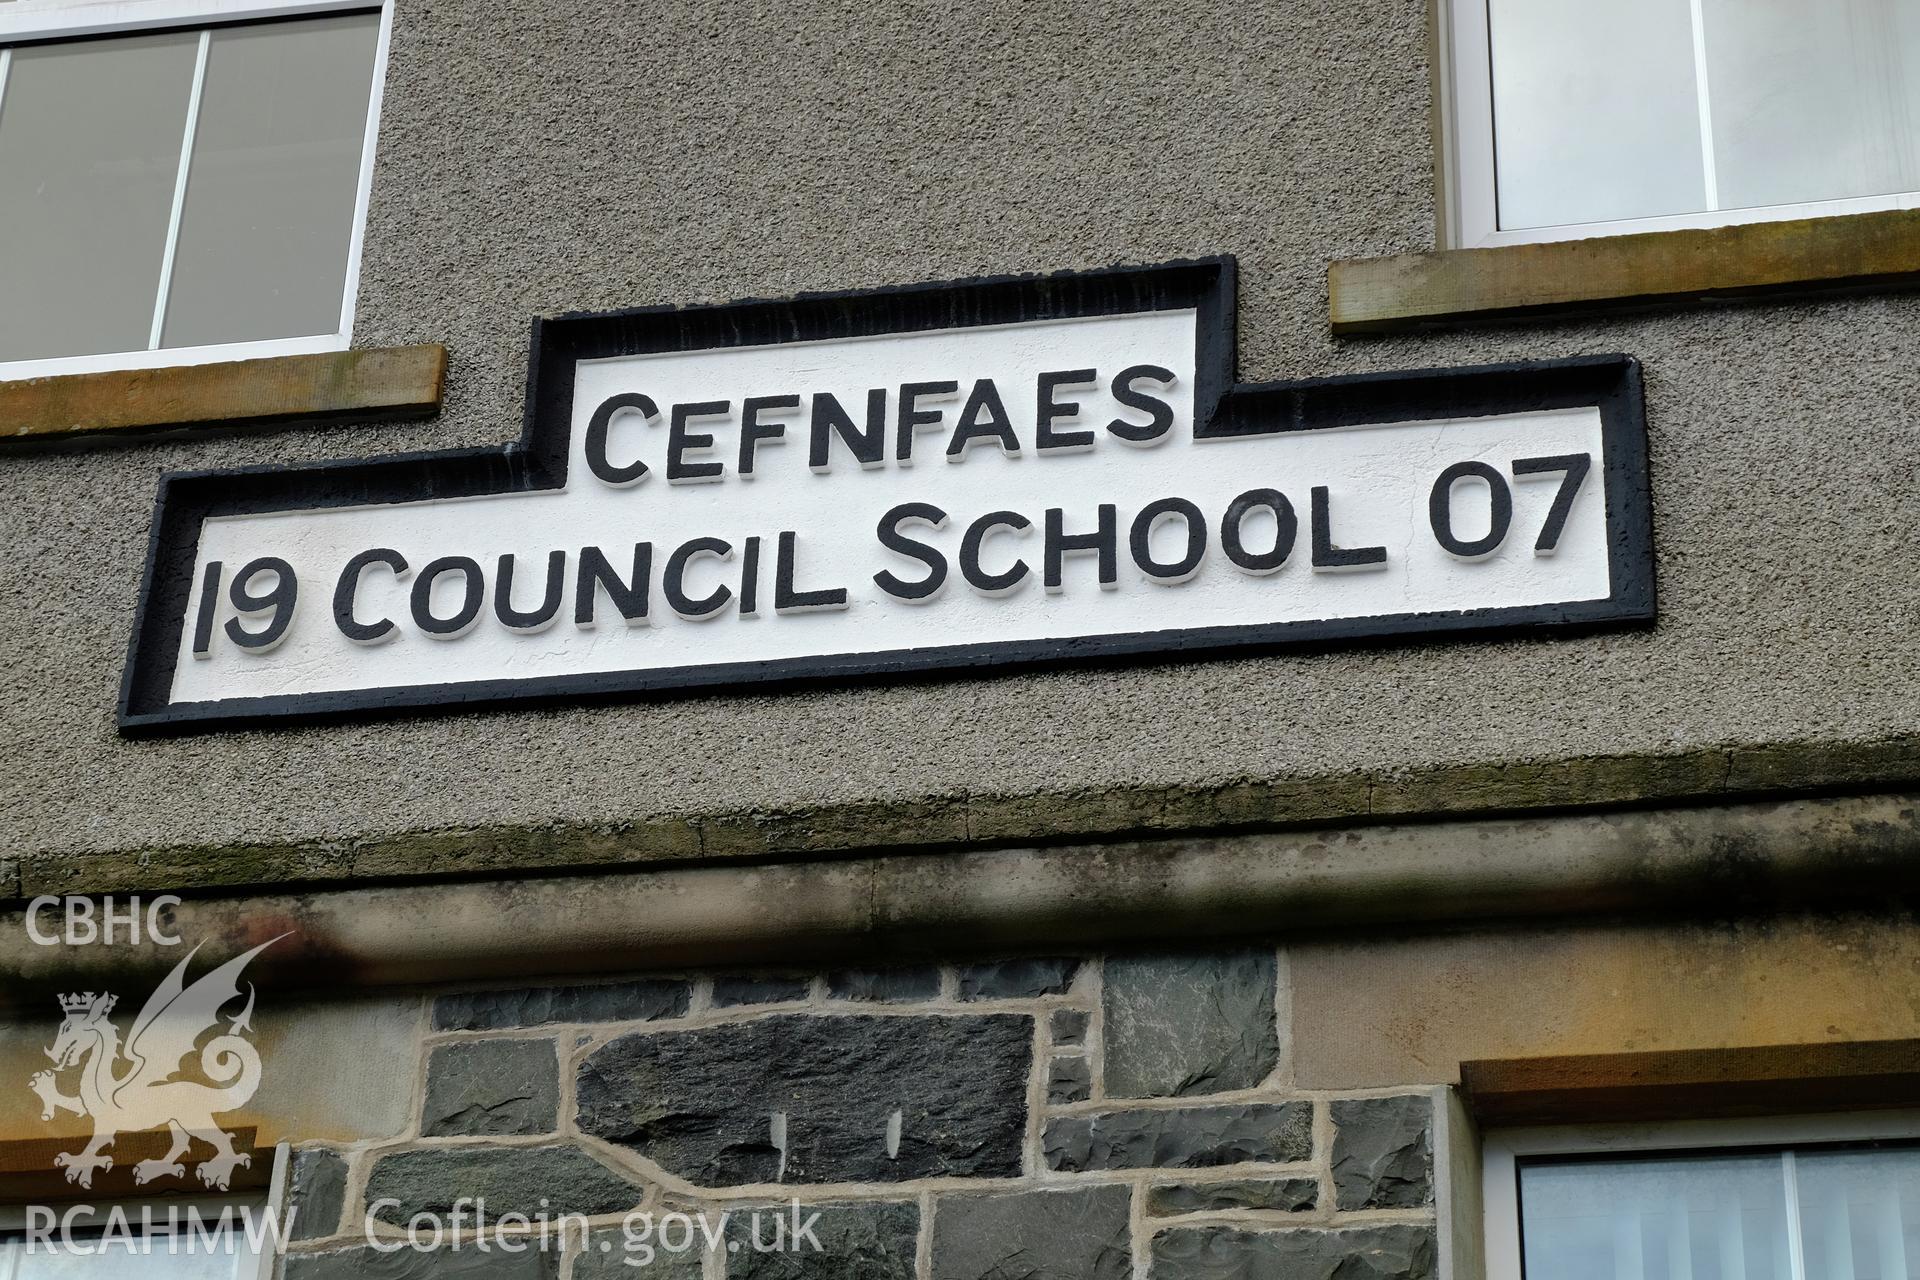 Colour photograph showing view of tablet on south front of Cefnfaes Council School, Bethesda, produced by Richard Hayman 2nd February 2017